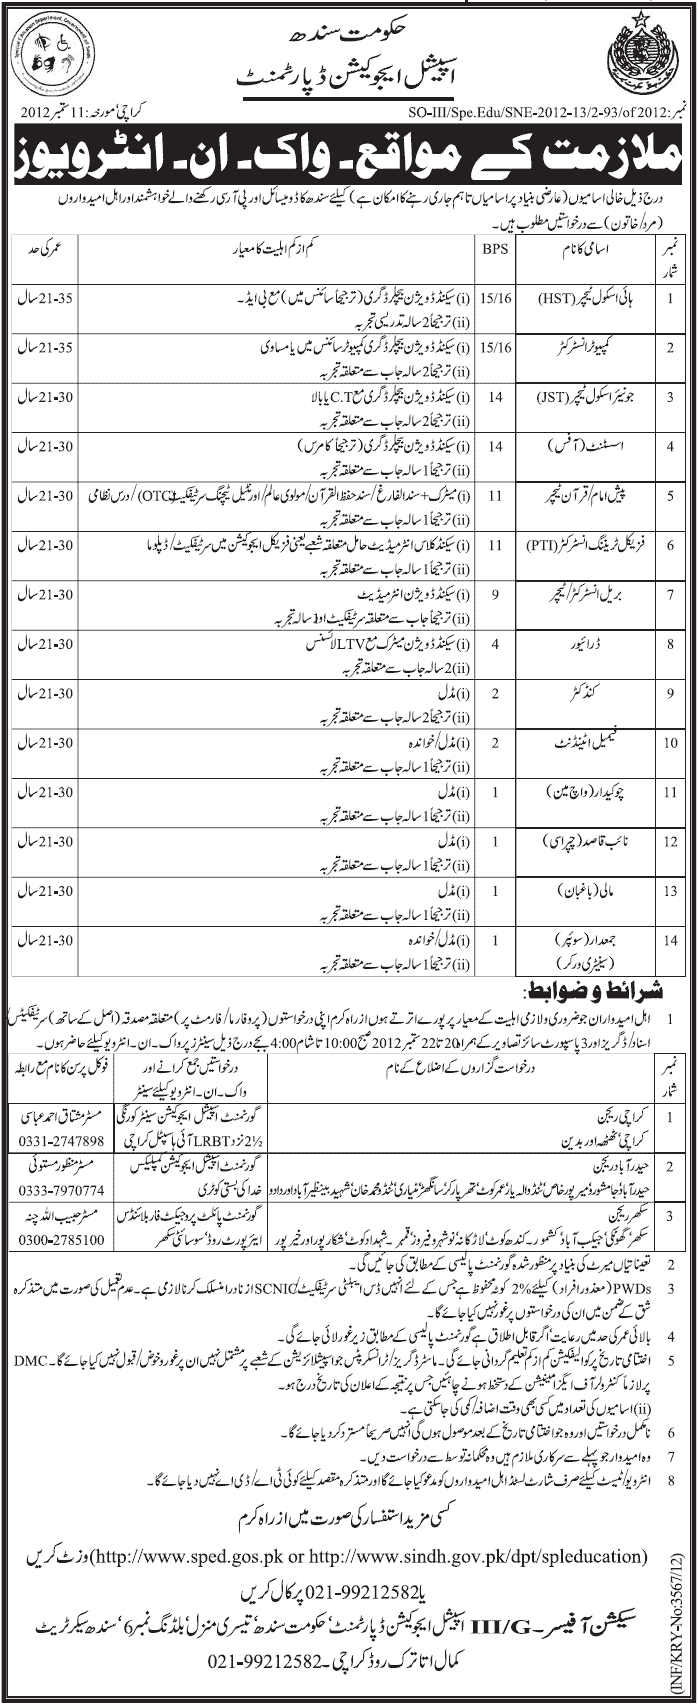 Special Education Department Government of Sindh Jobs (Government Job)